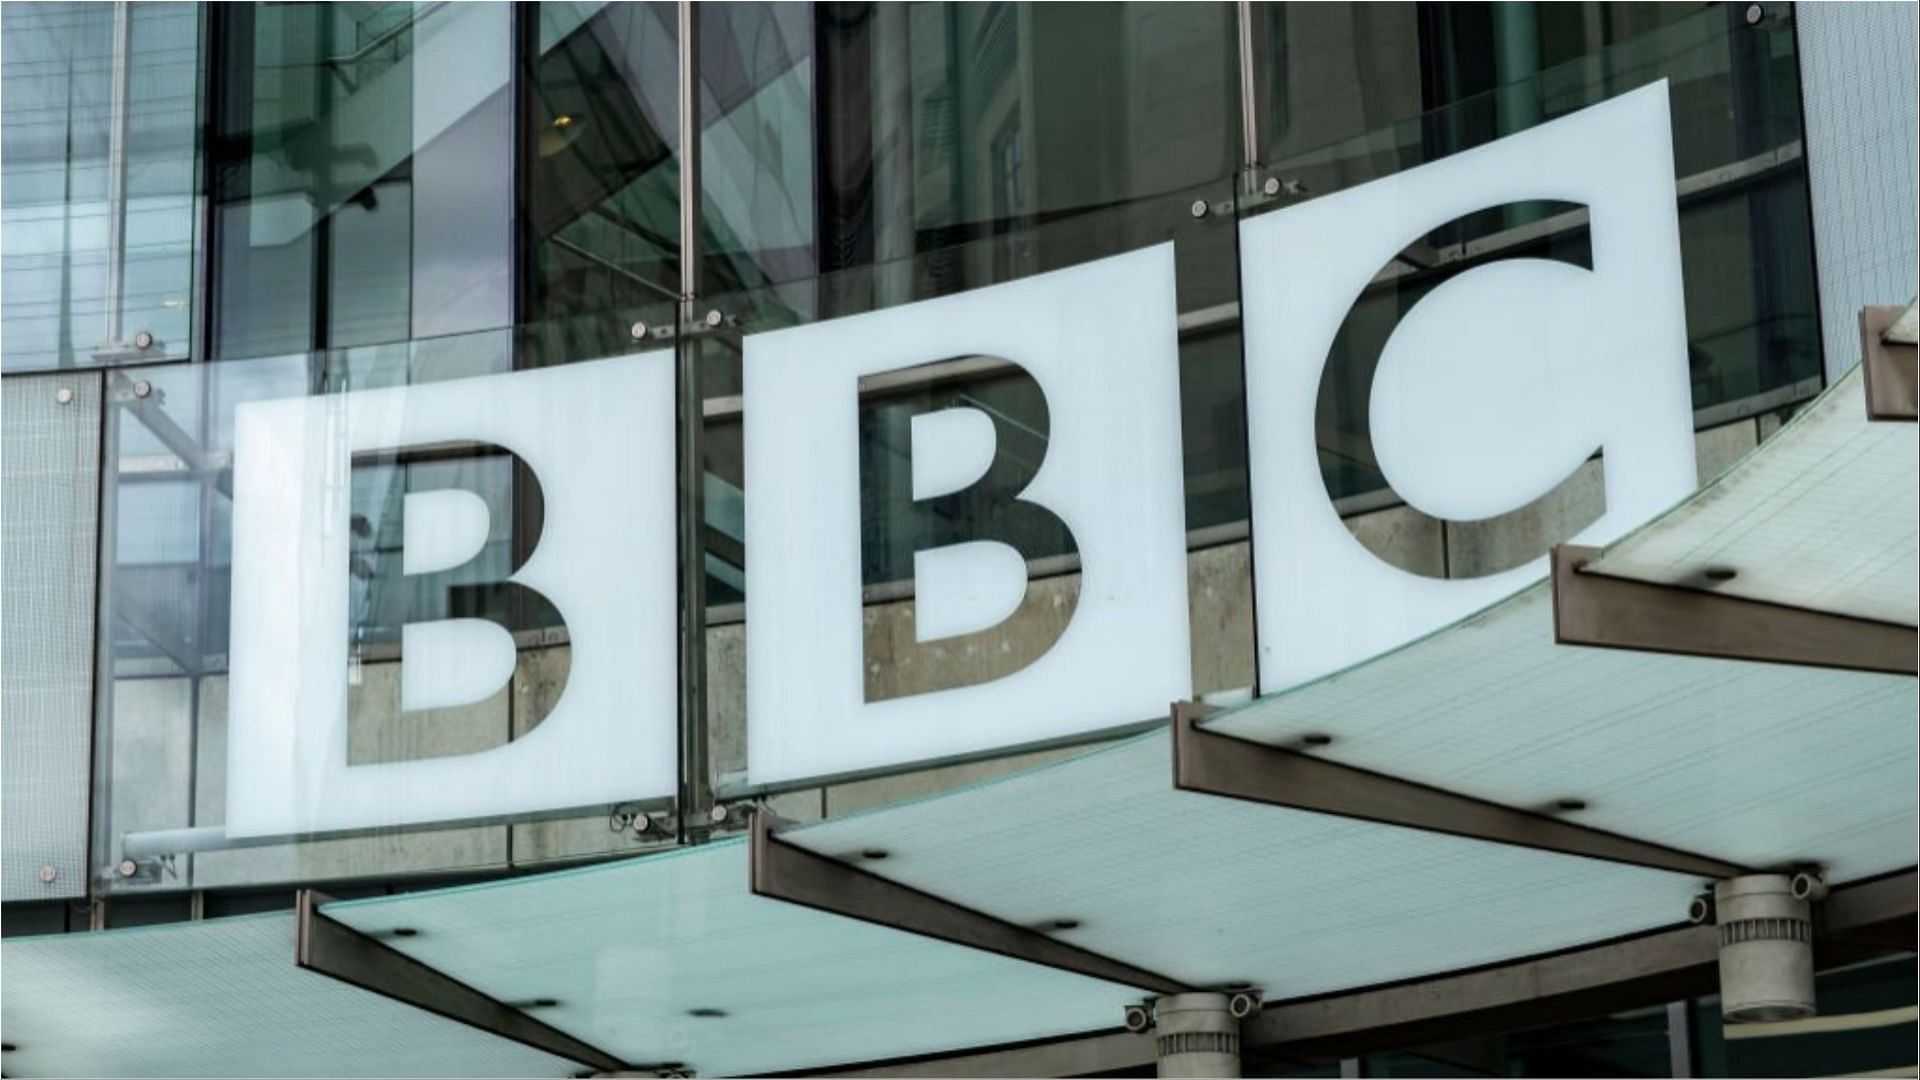 BBC presenter paid money to a girl in exchange of explicit pictures (Image via Mike Kemp/Getty Images)